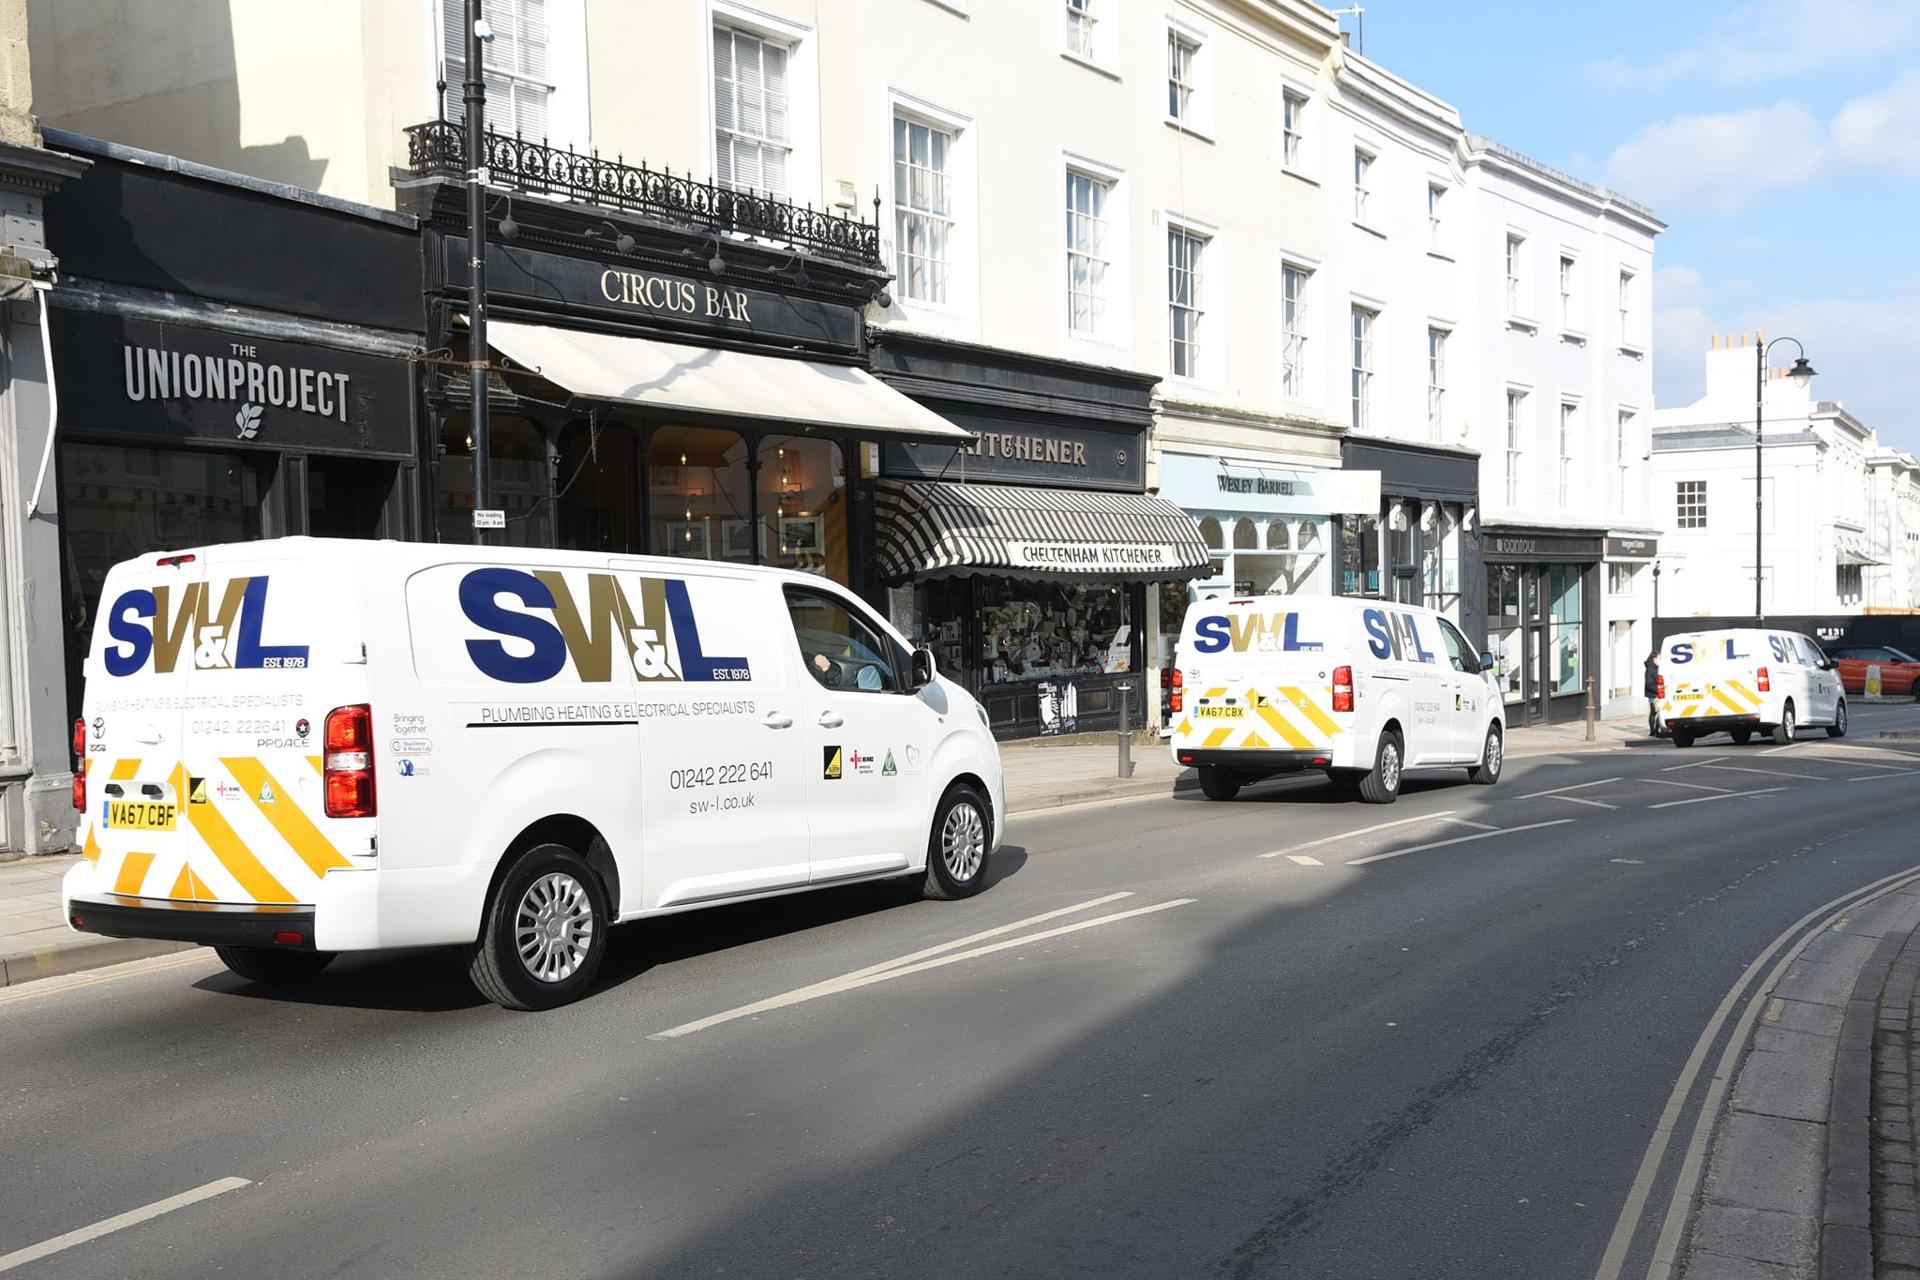 Cheltenham plumbing and electrical firm enters administration